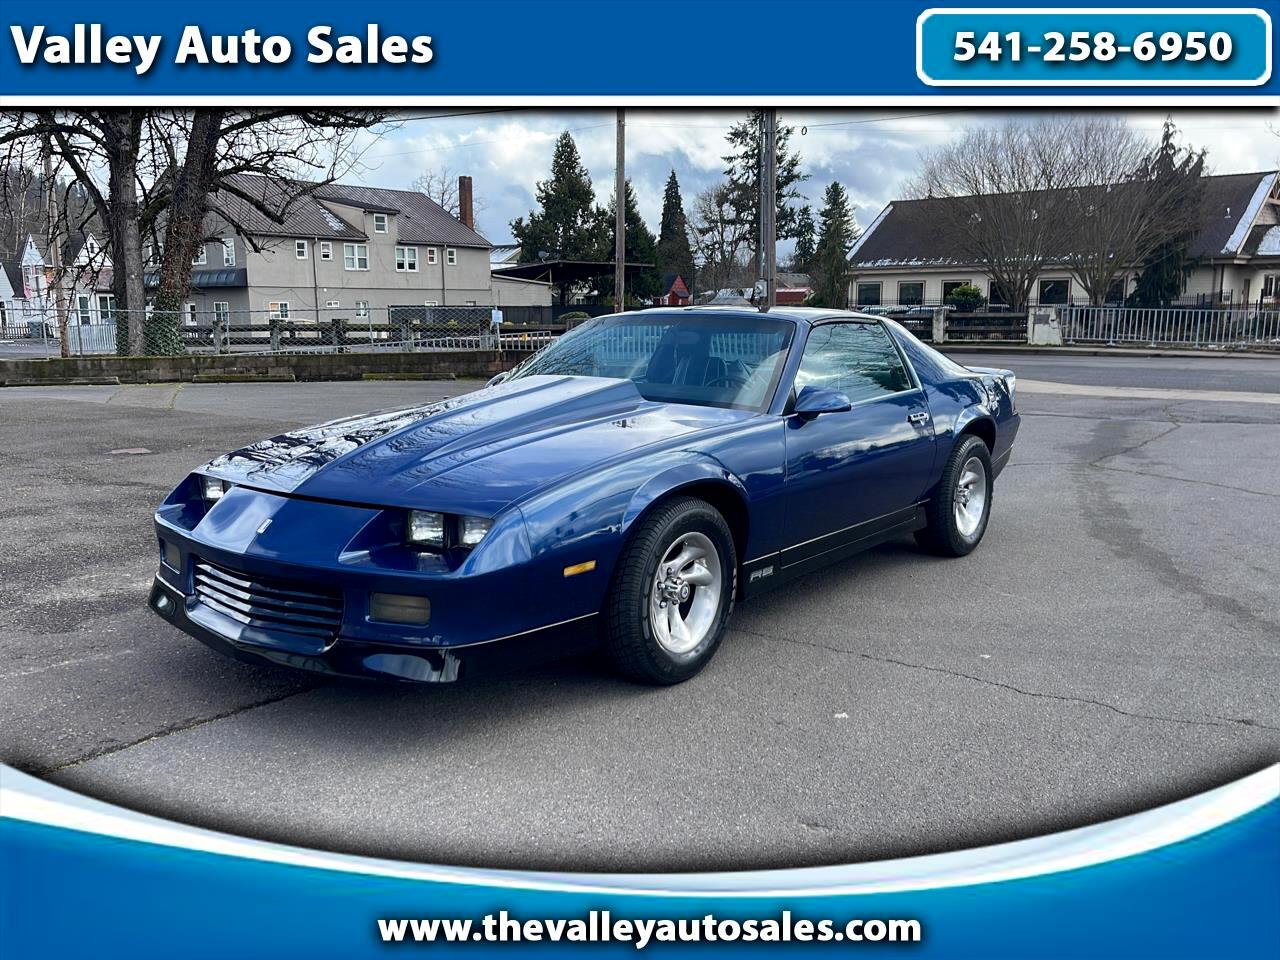 Chevrolet Camaro 2dr Coupe RS 1989